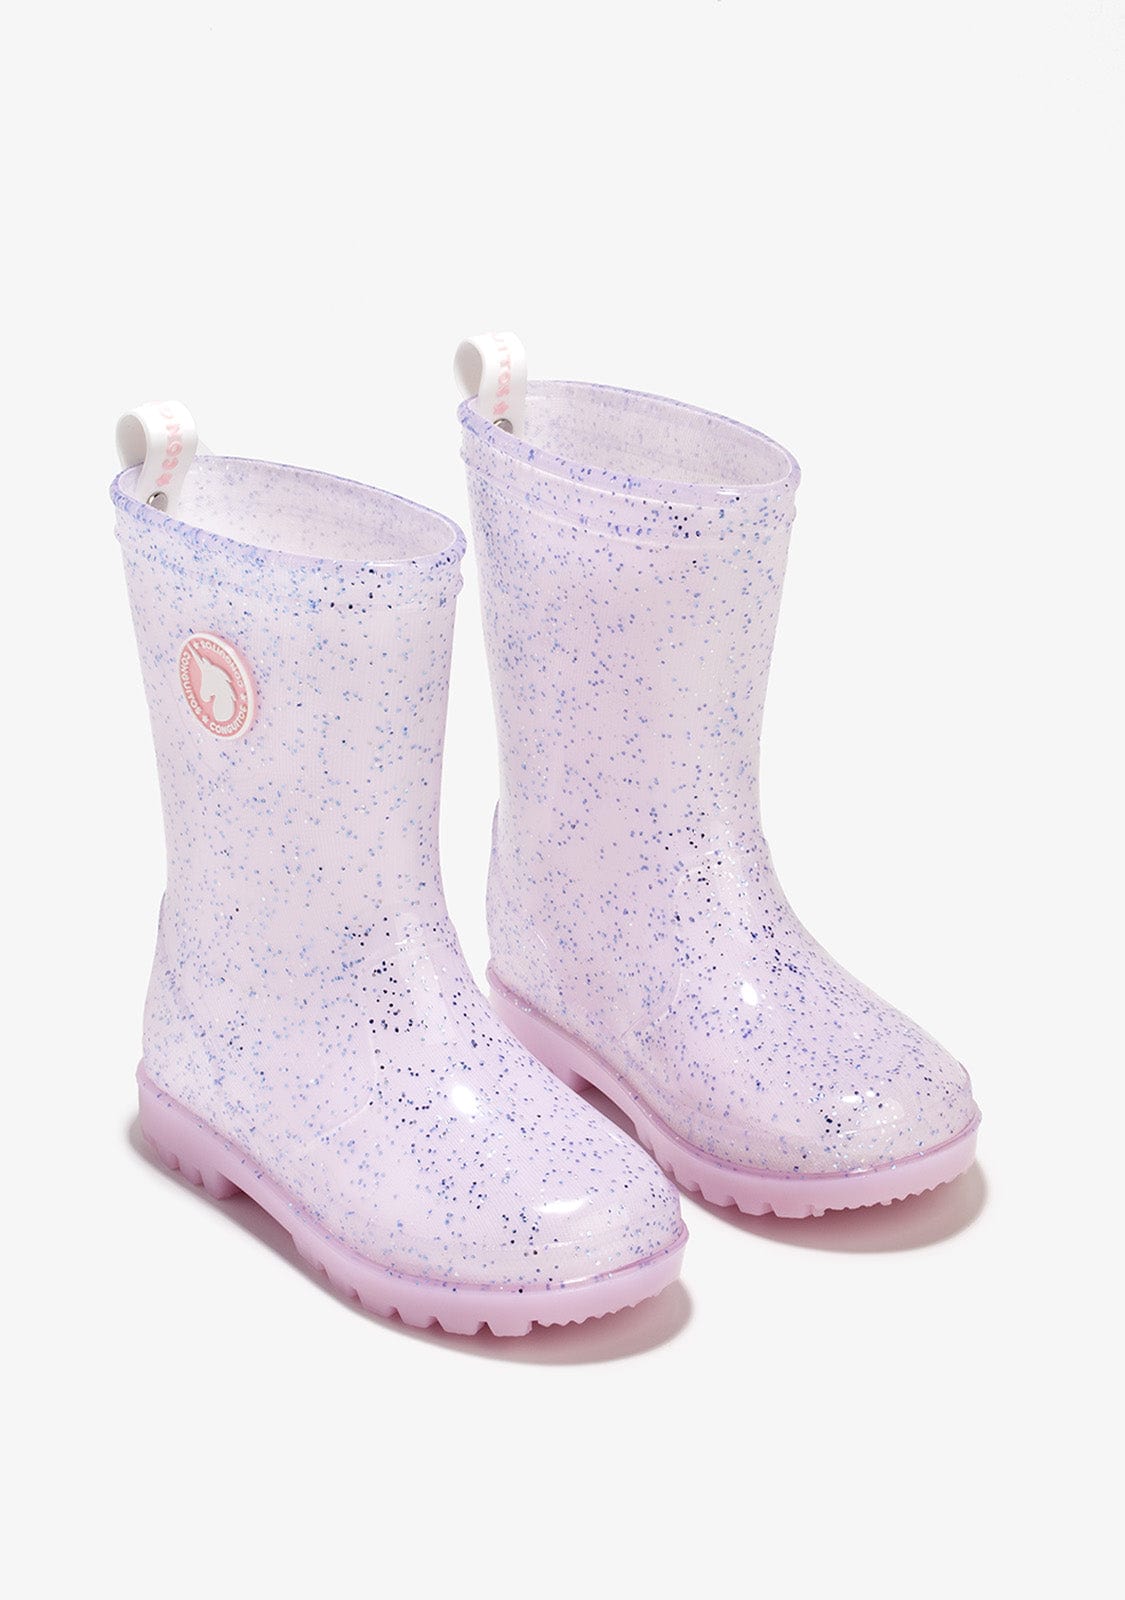 CONGUITOS Shoes Girl's Pink With Lights Rain Boots